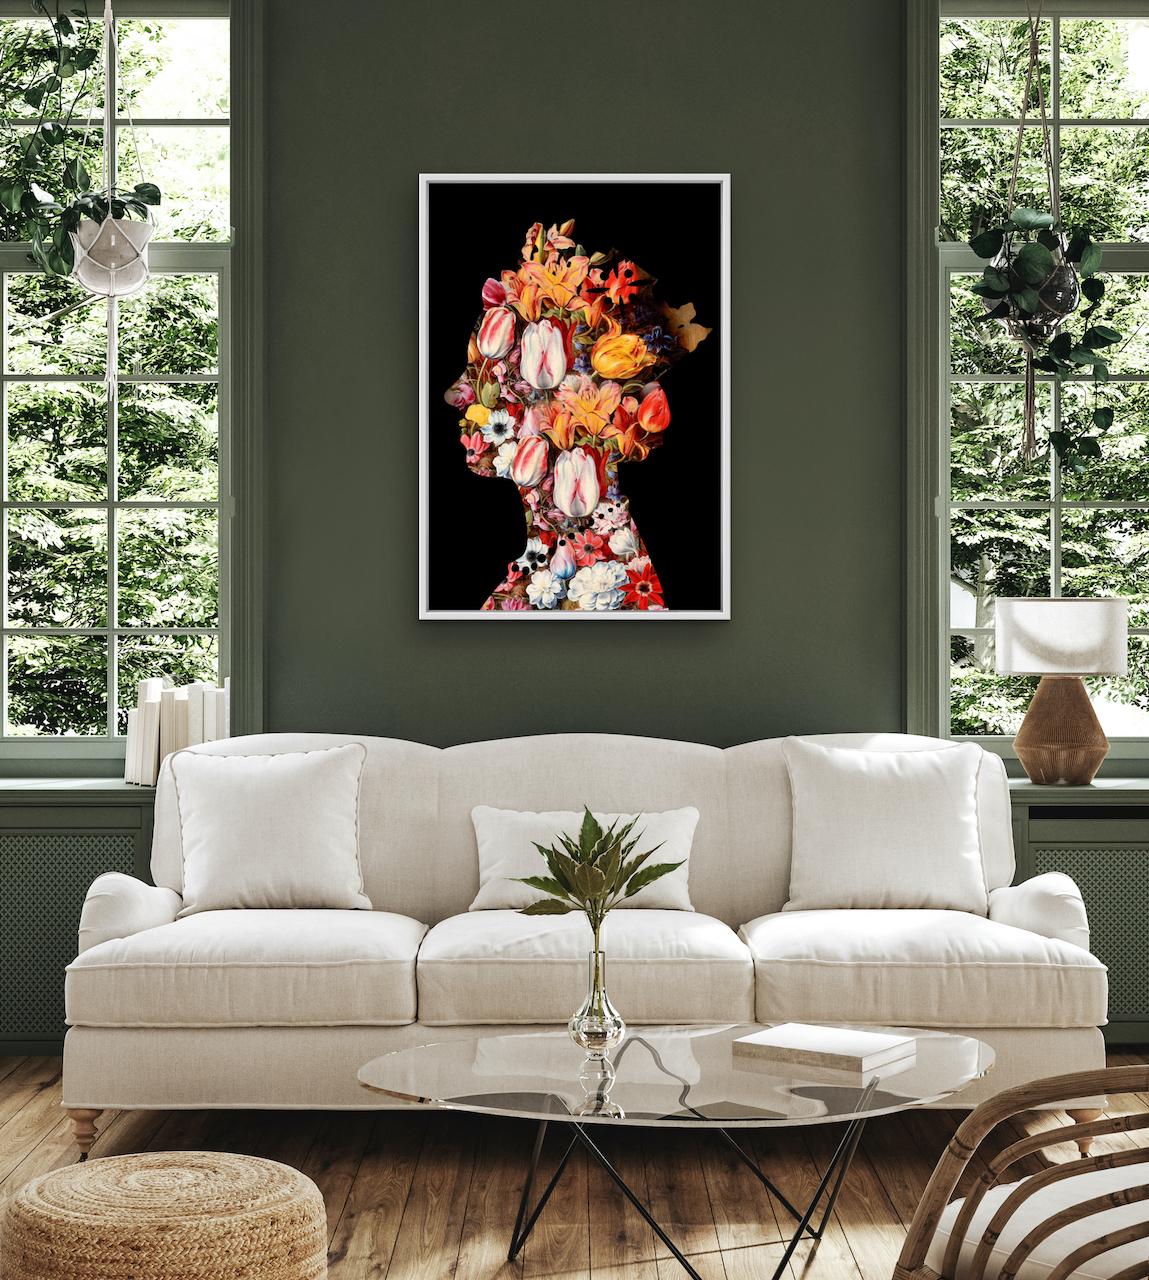 One Queen (2) Black, Contemporary Floral Art, Queen Elizabeth II, Digital Prints - Painting by Agent X